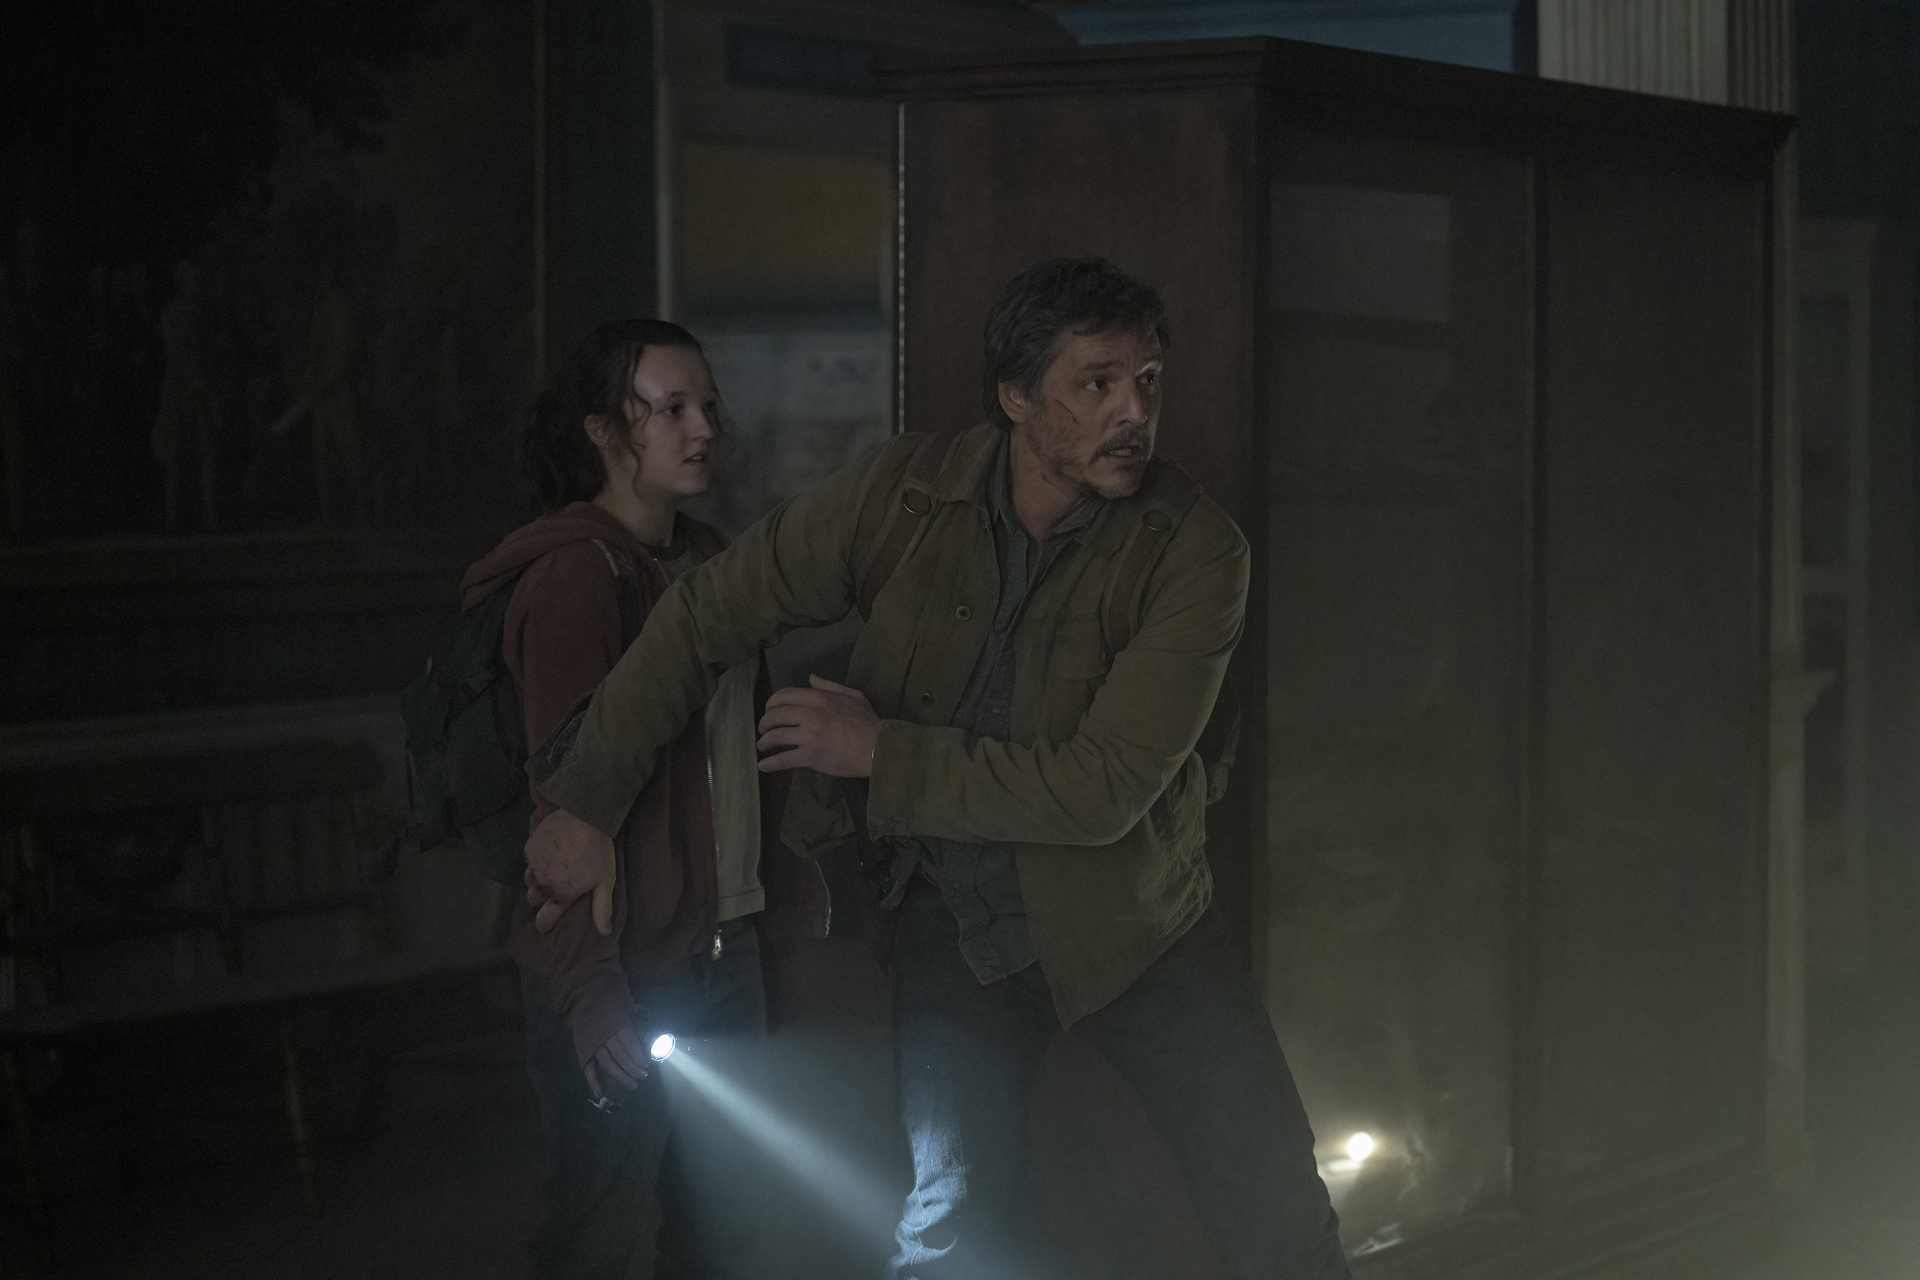 Joel (Pedro Pascal) reaching back to cover Ellie (Bella Ramsey)